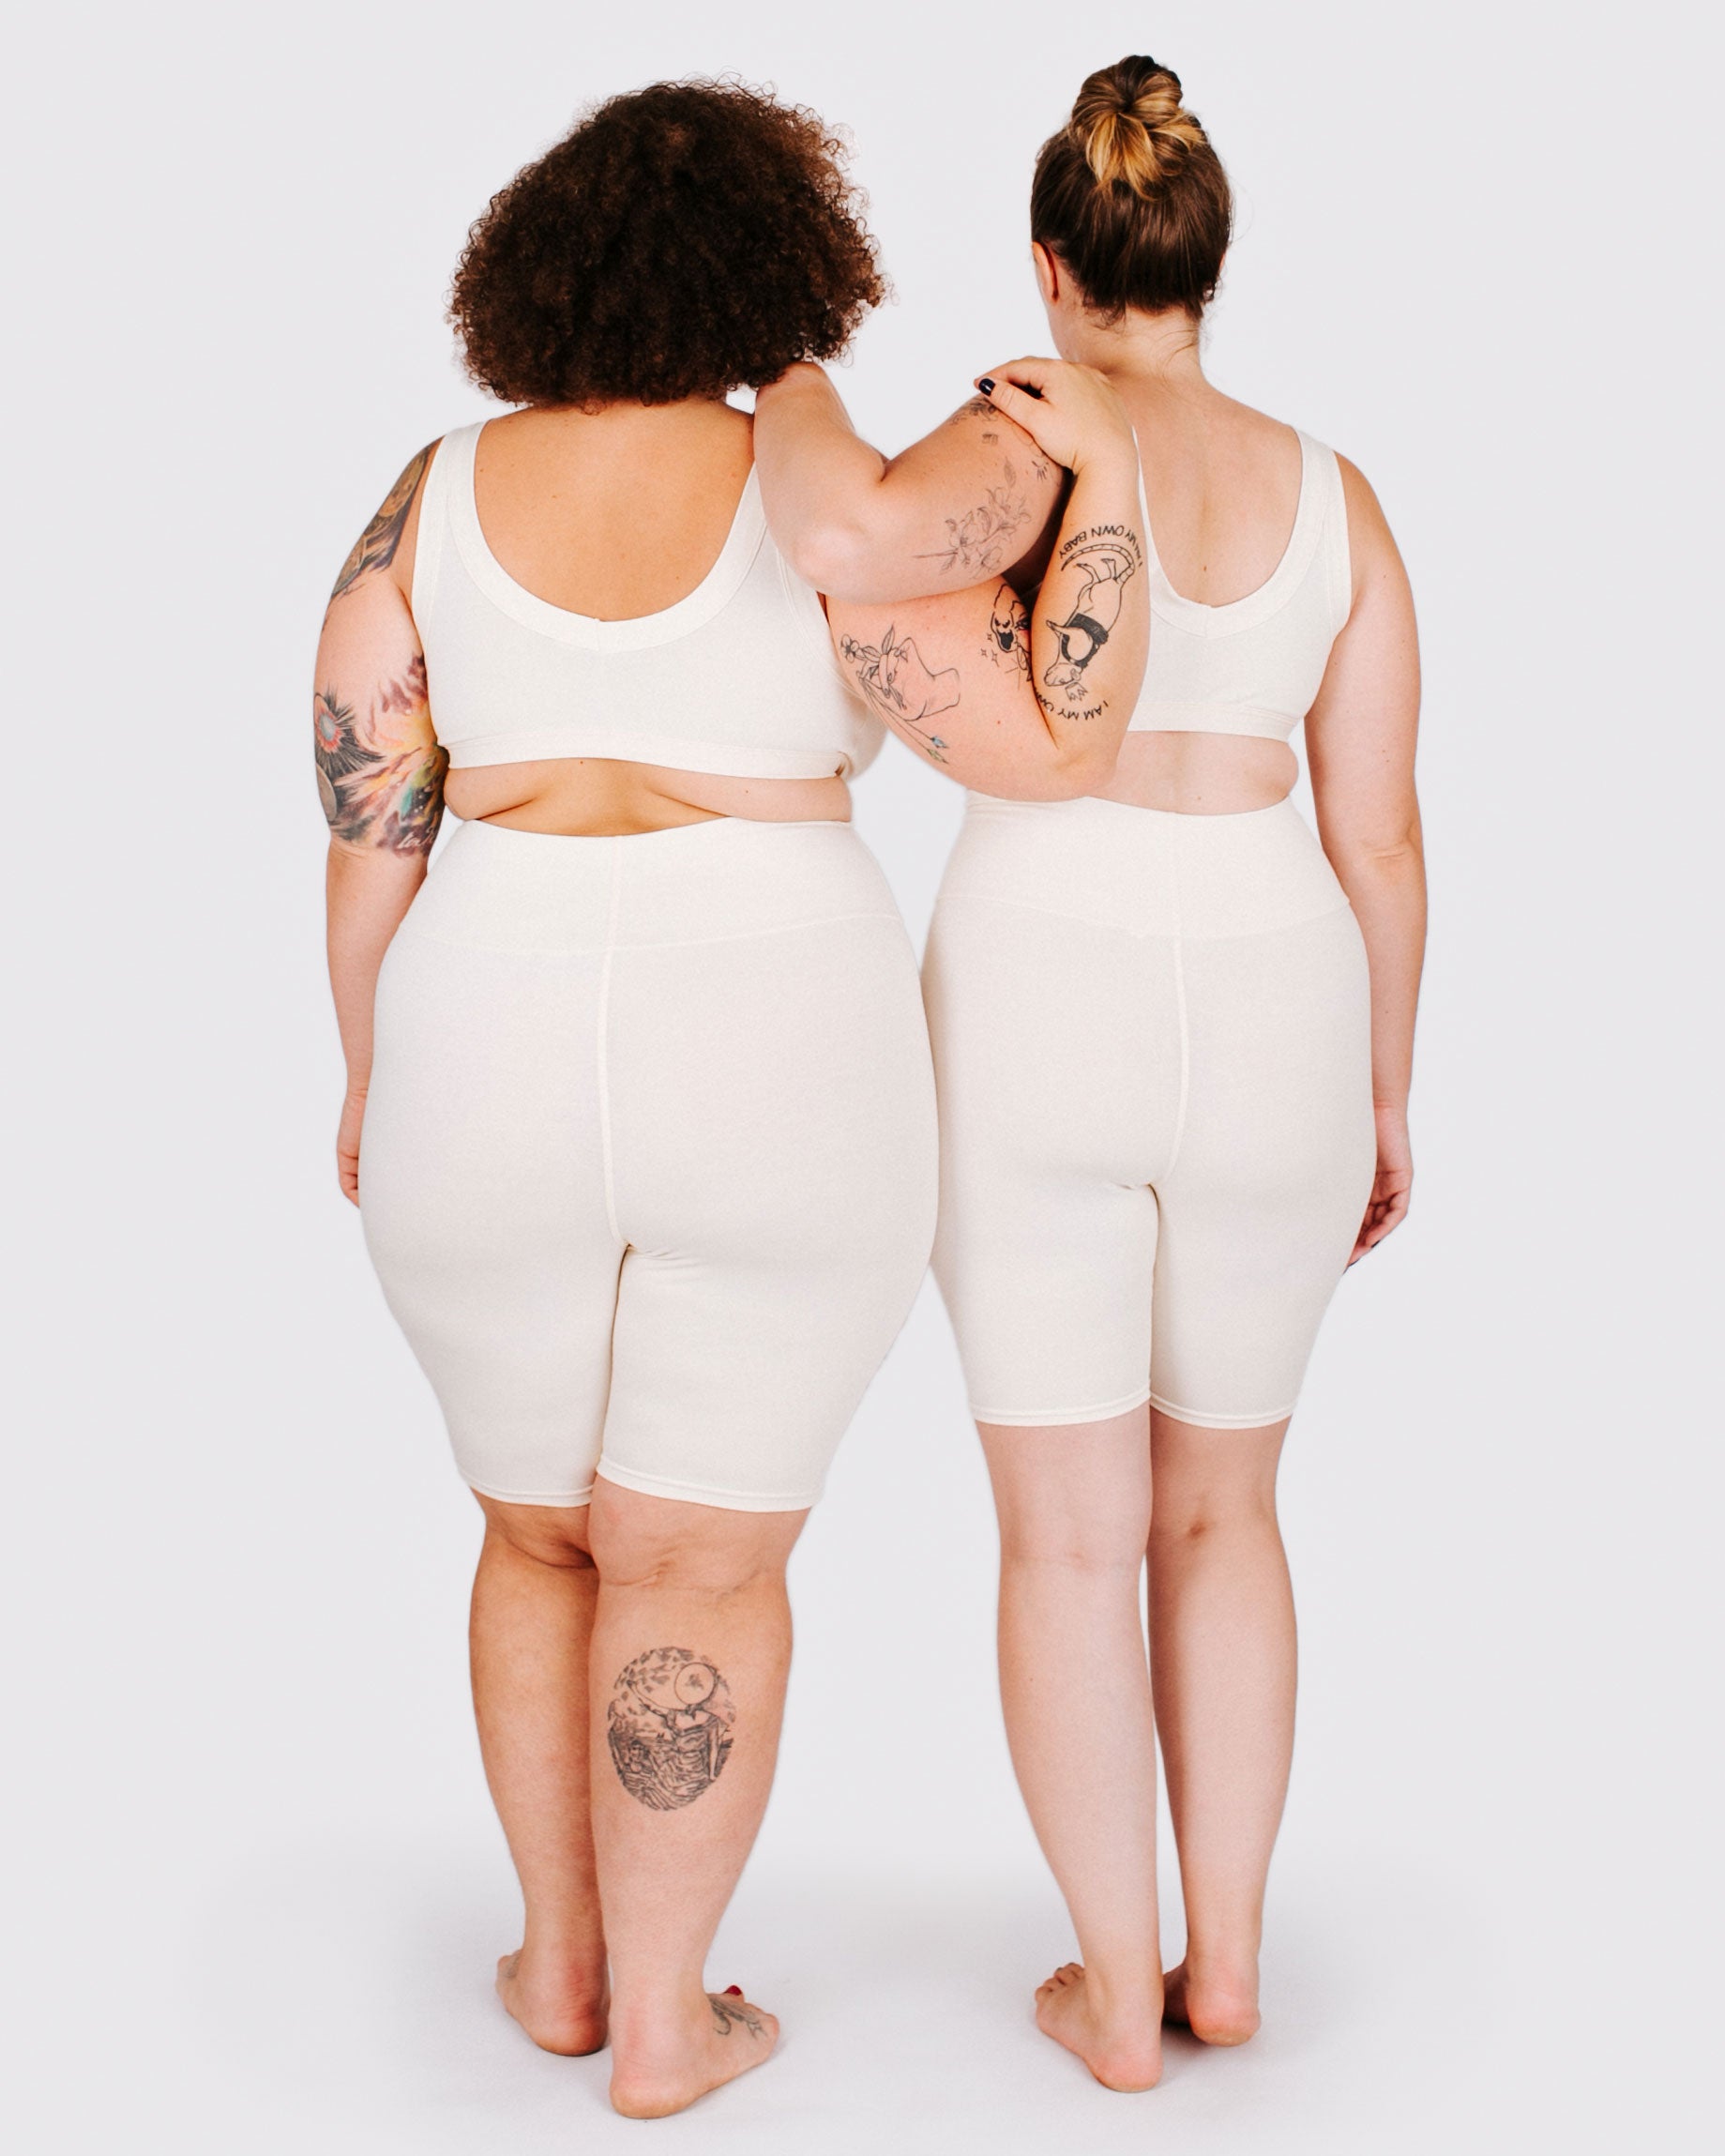 Fit photo from the back of Thunderpants organic cotton Bike Shorts and Bralettes in off-white on two model standing together.